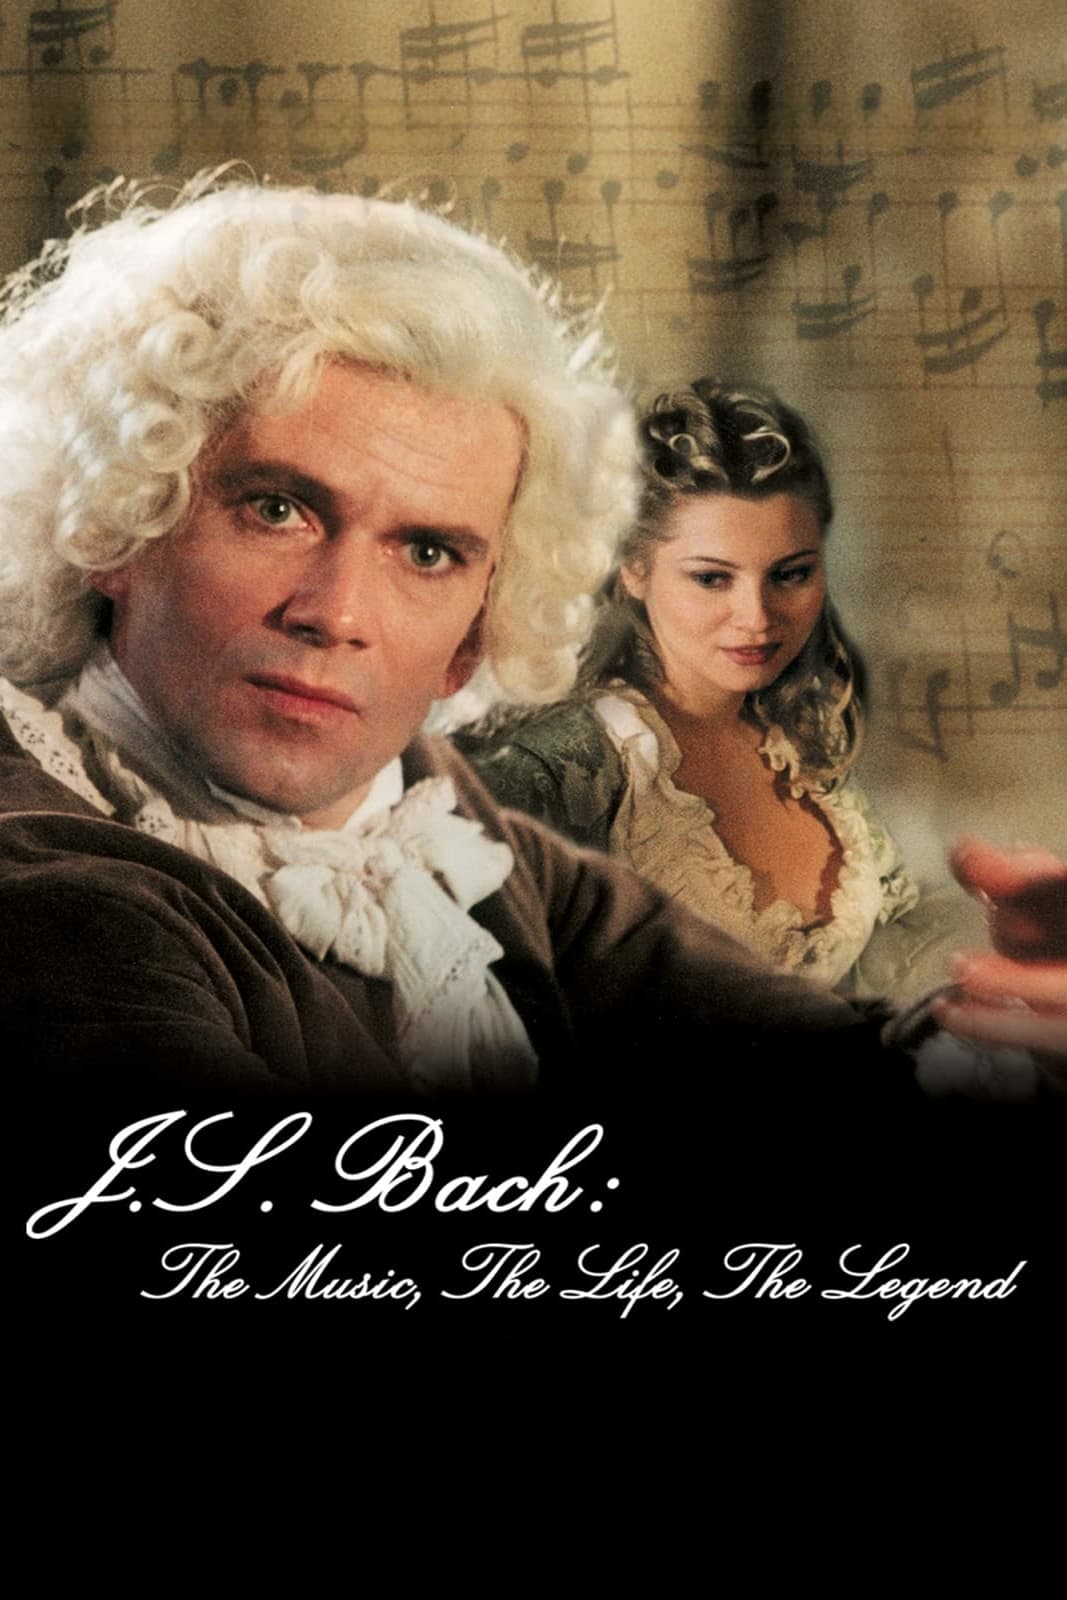 J.S. Bach: The Music, The Life, The Legend on FREECABLE TV